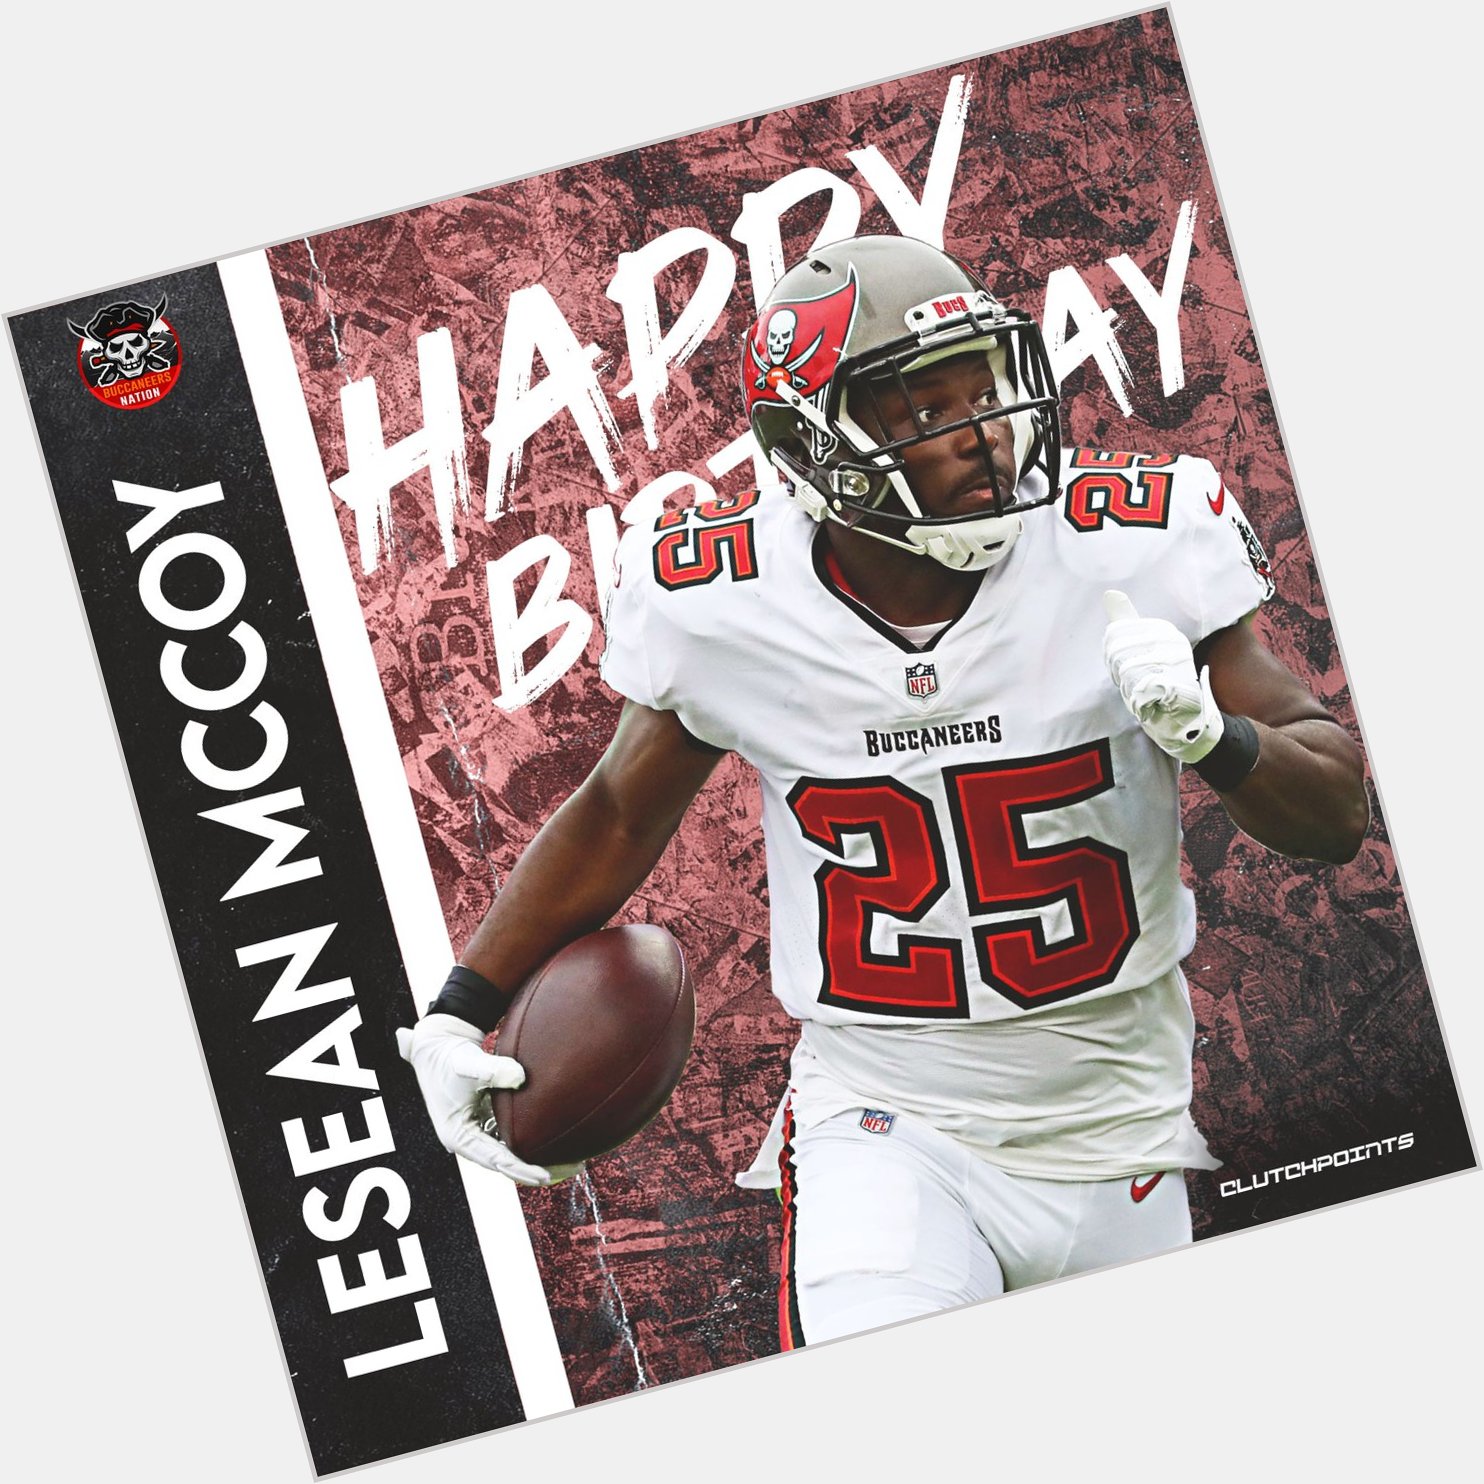 Join Buccaneers Nation in wishing 2x SuperBowl Champion, LeSean McCoy, a happy 33rd birthday!  